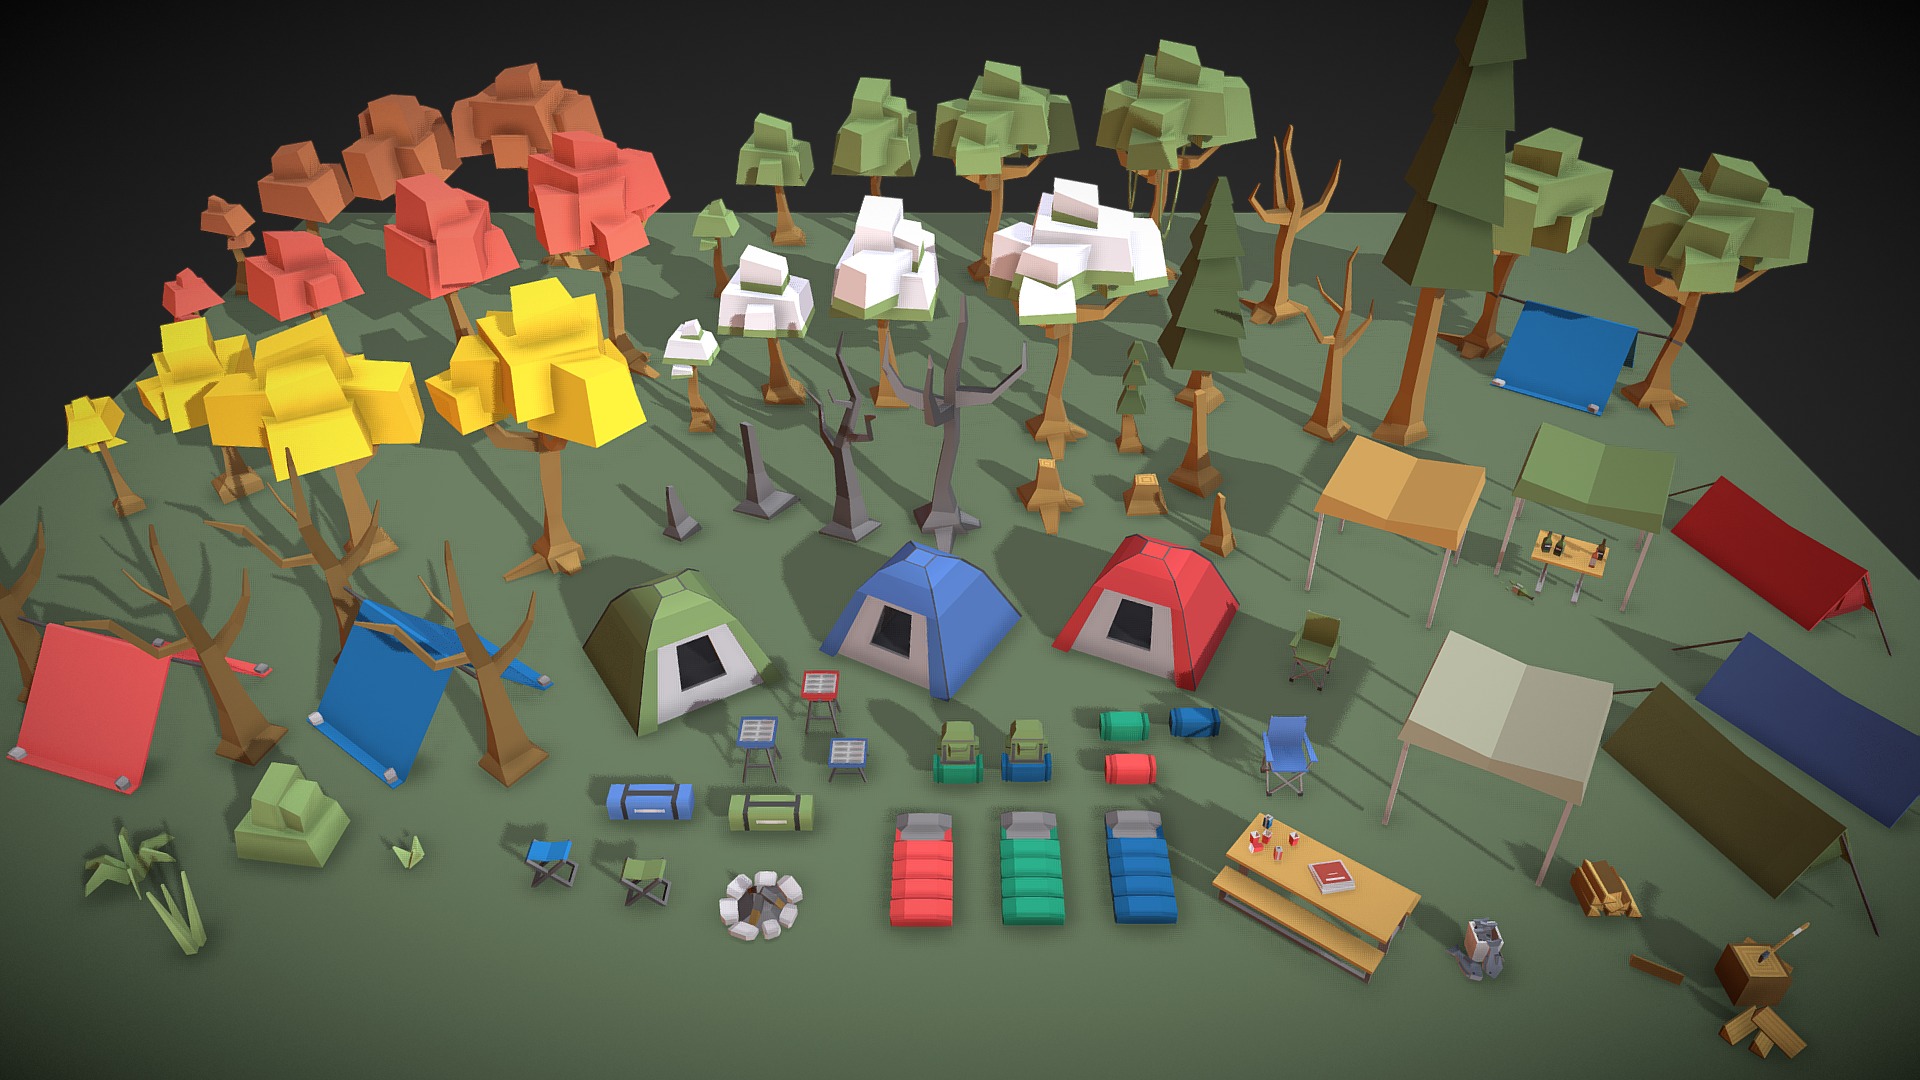 3D model Simple Apocalypse – Camp Set - This is a 3D model of the Simple Apocalypse - Camp Set. The 3D model is about a group of people sitting in a circle with colorful chairs.